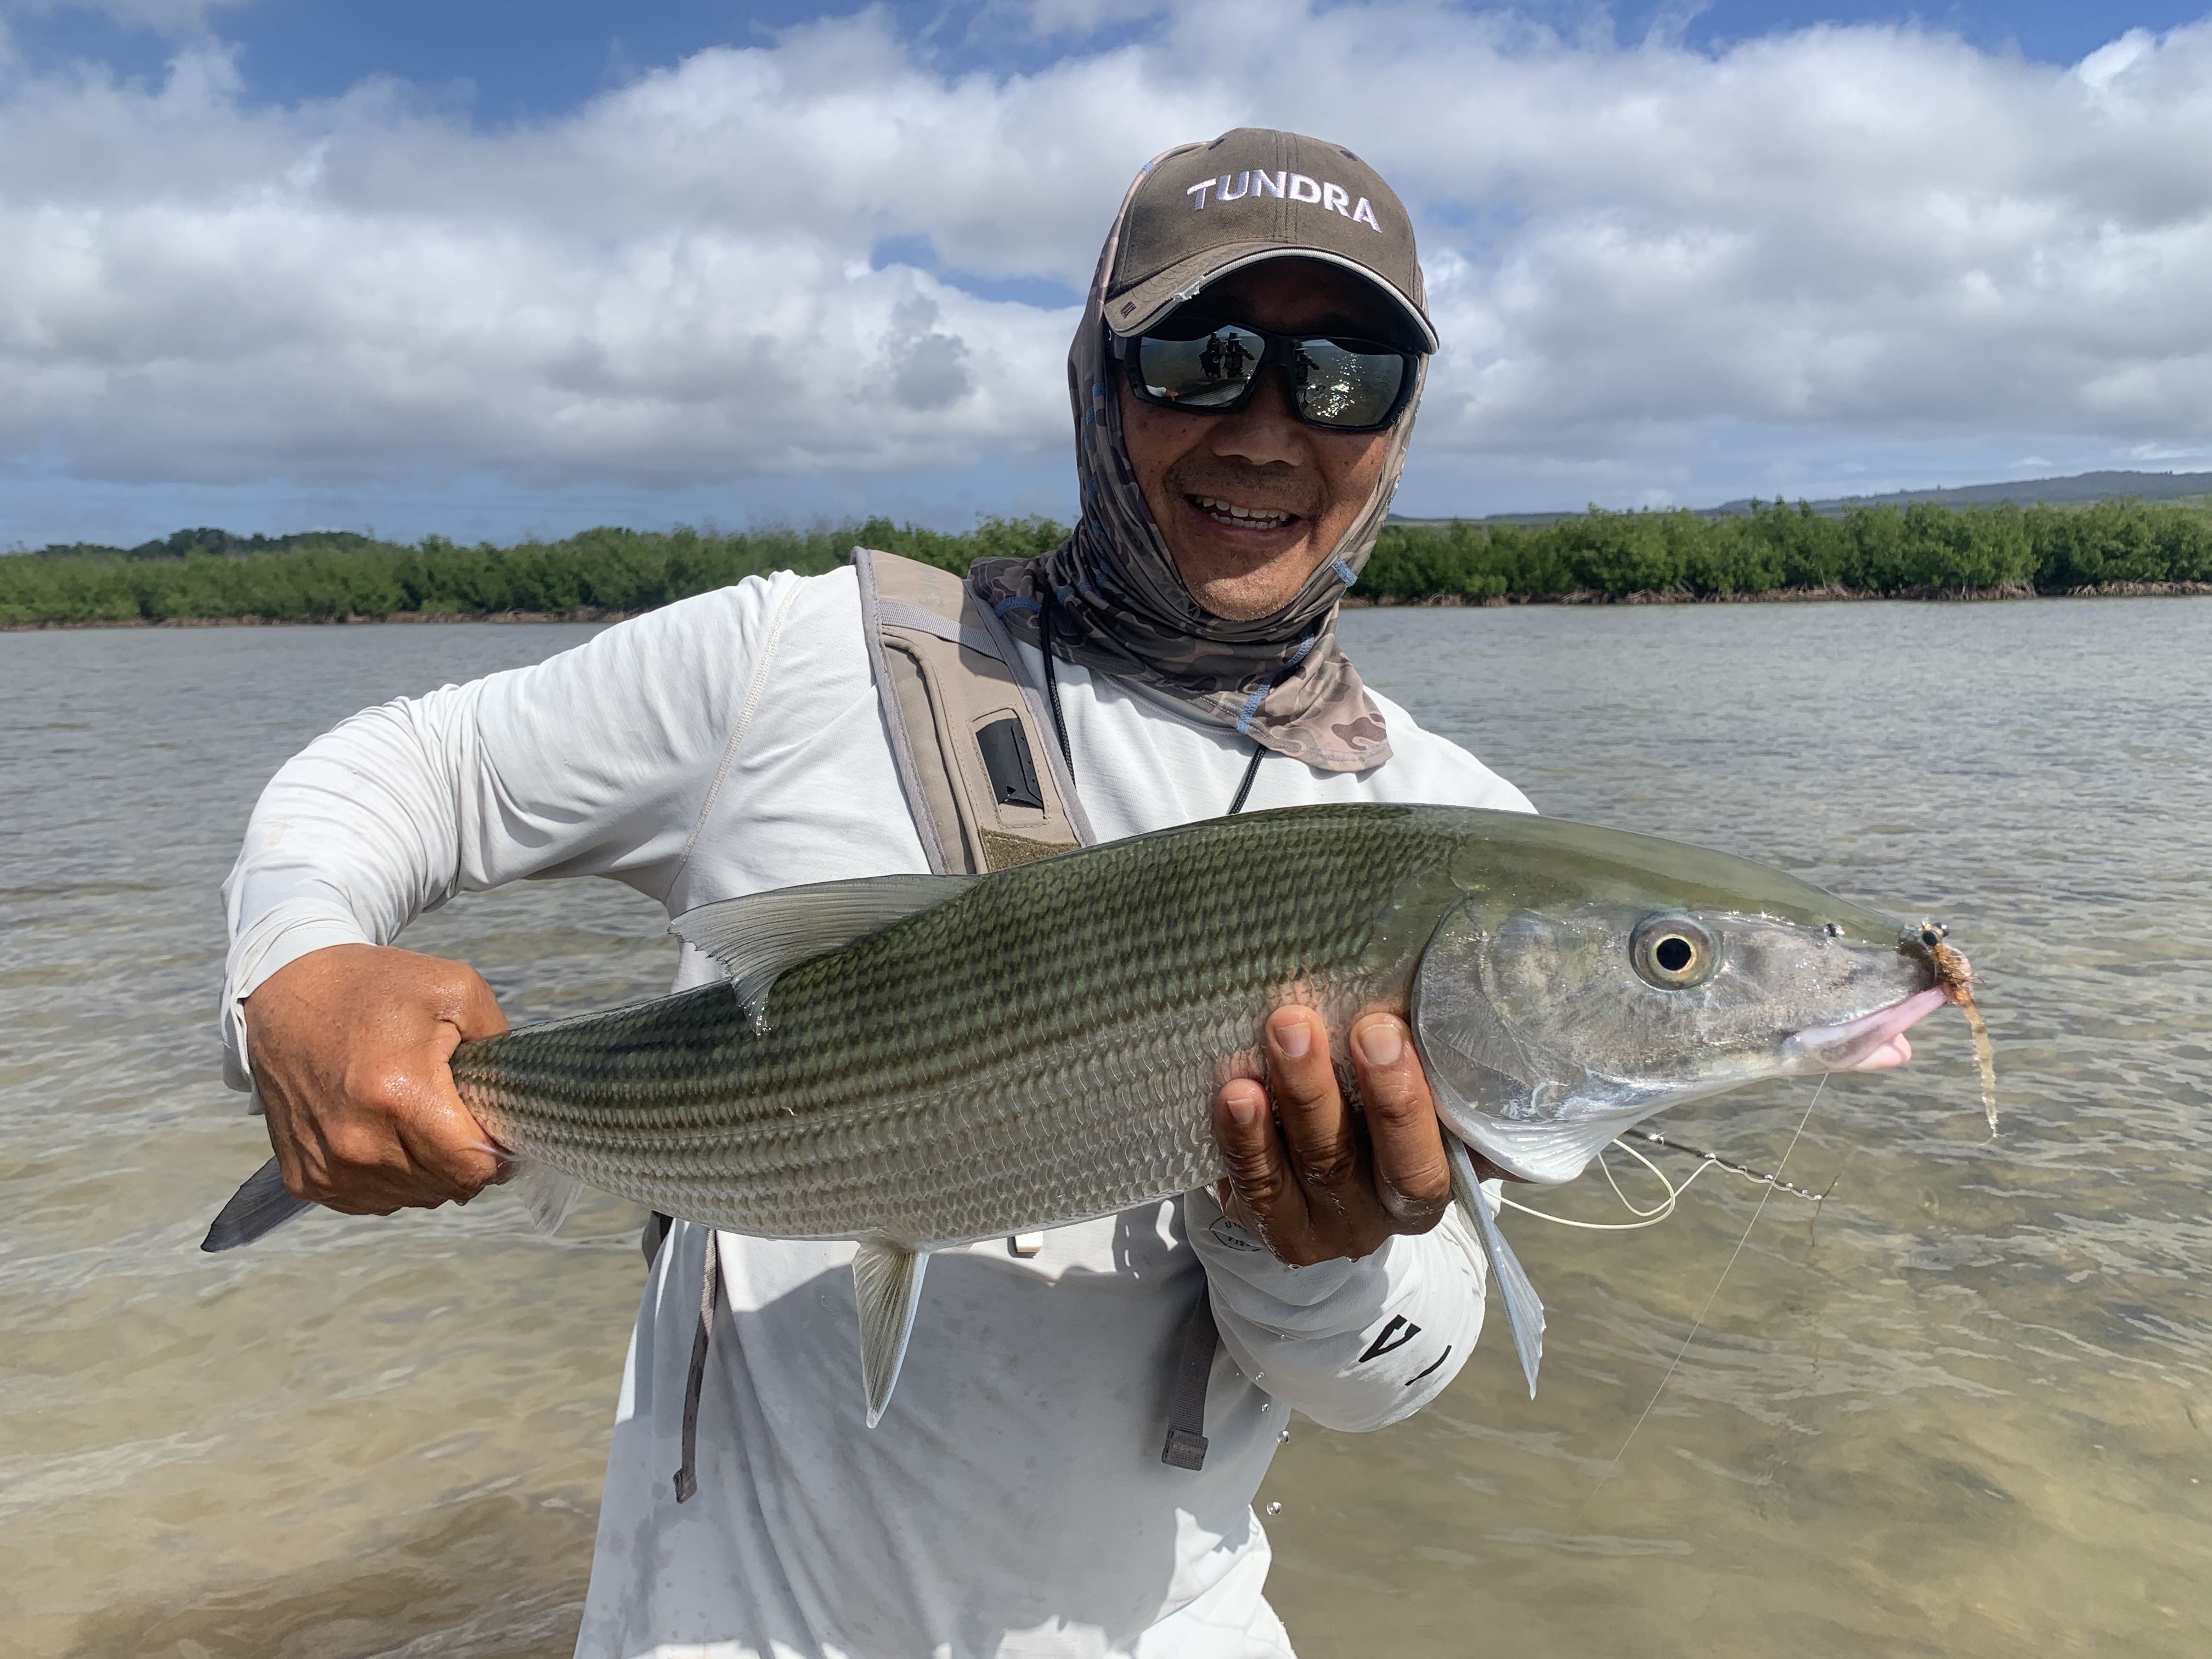 Ed Sumida scored a beautiful Molokai Bonefish with his Sage Igniter 7wt rod  aand Spectrum Max reel. Personal best fish for this setup.